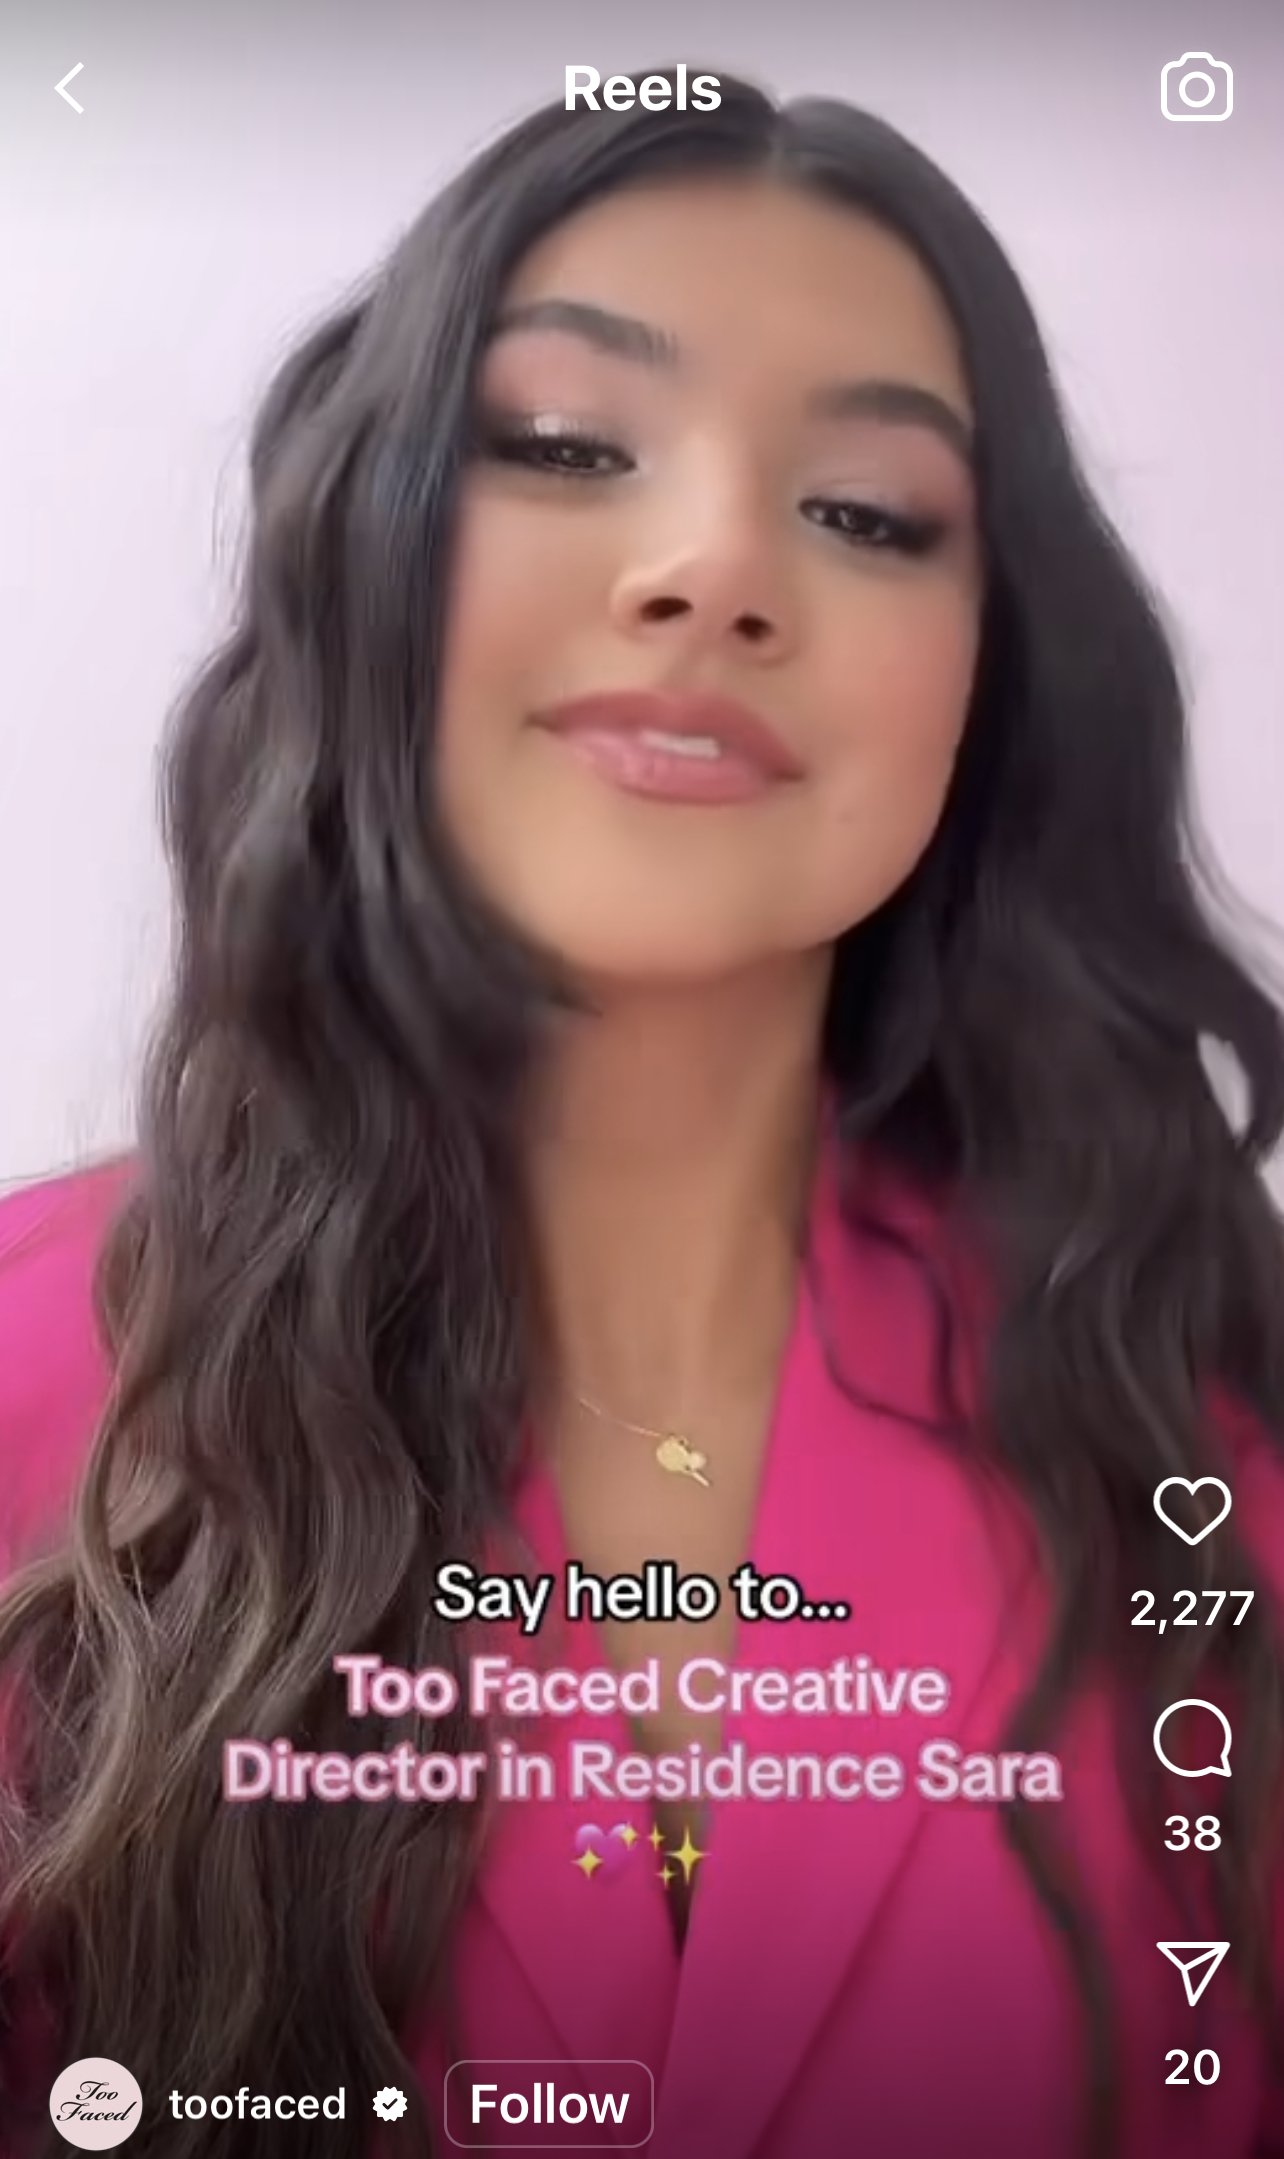 Too Faced Hires TikTok Star Sara Echeagaray as its First-Ever Creative Director in Residence